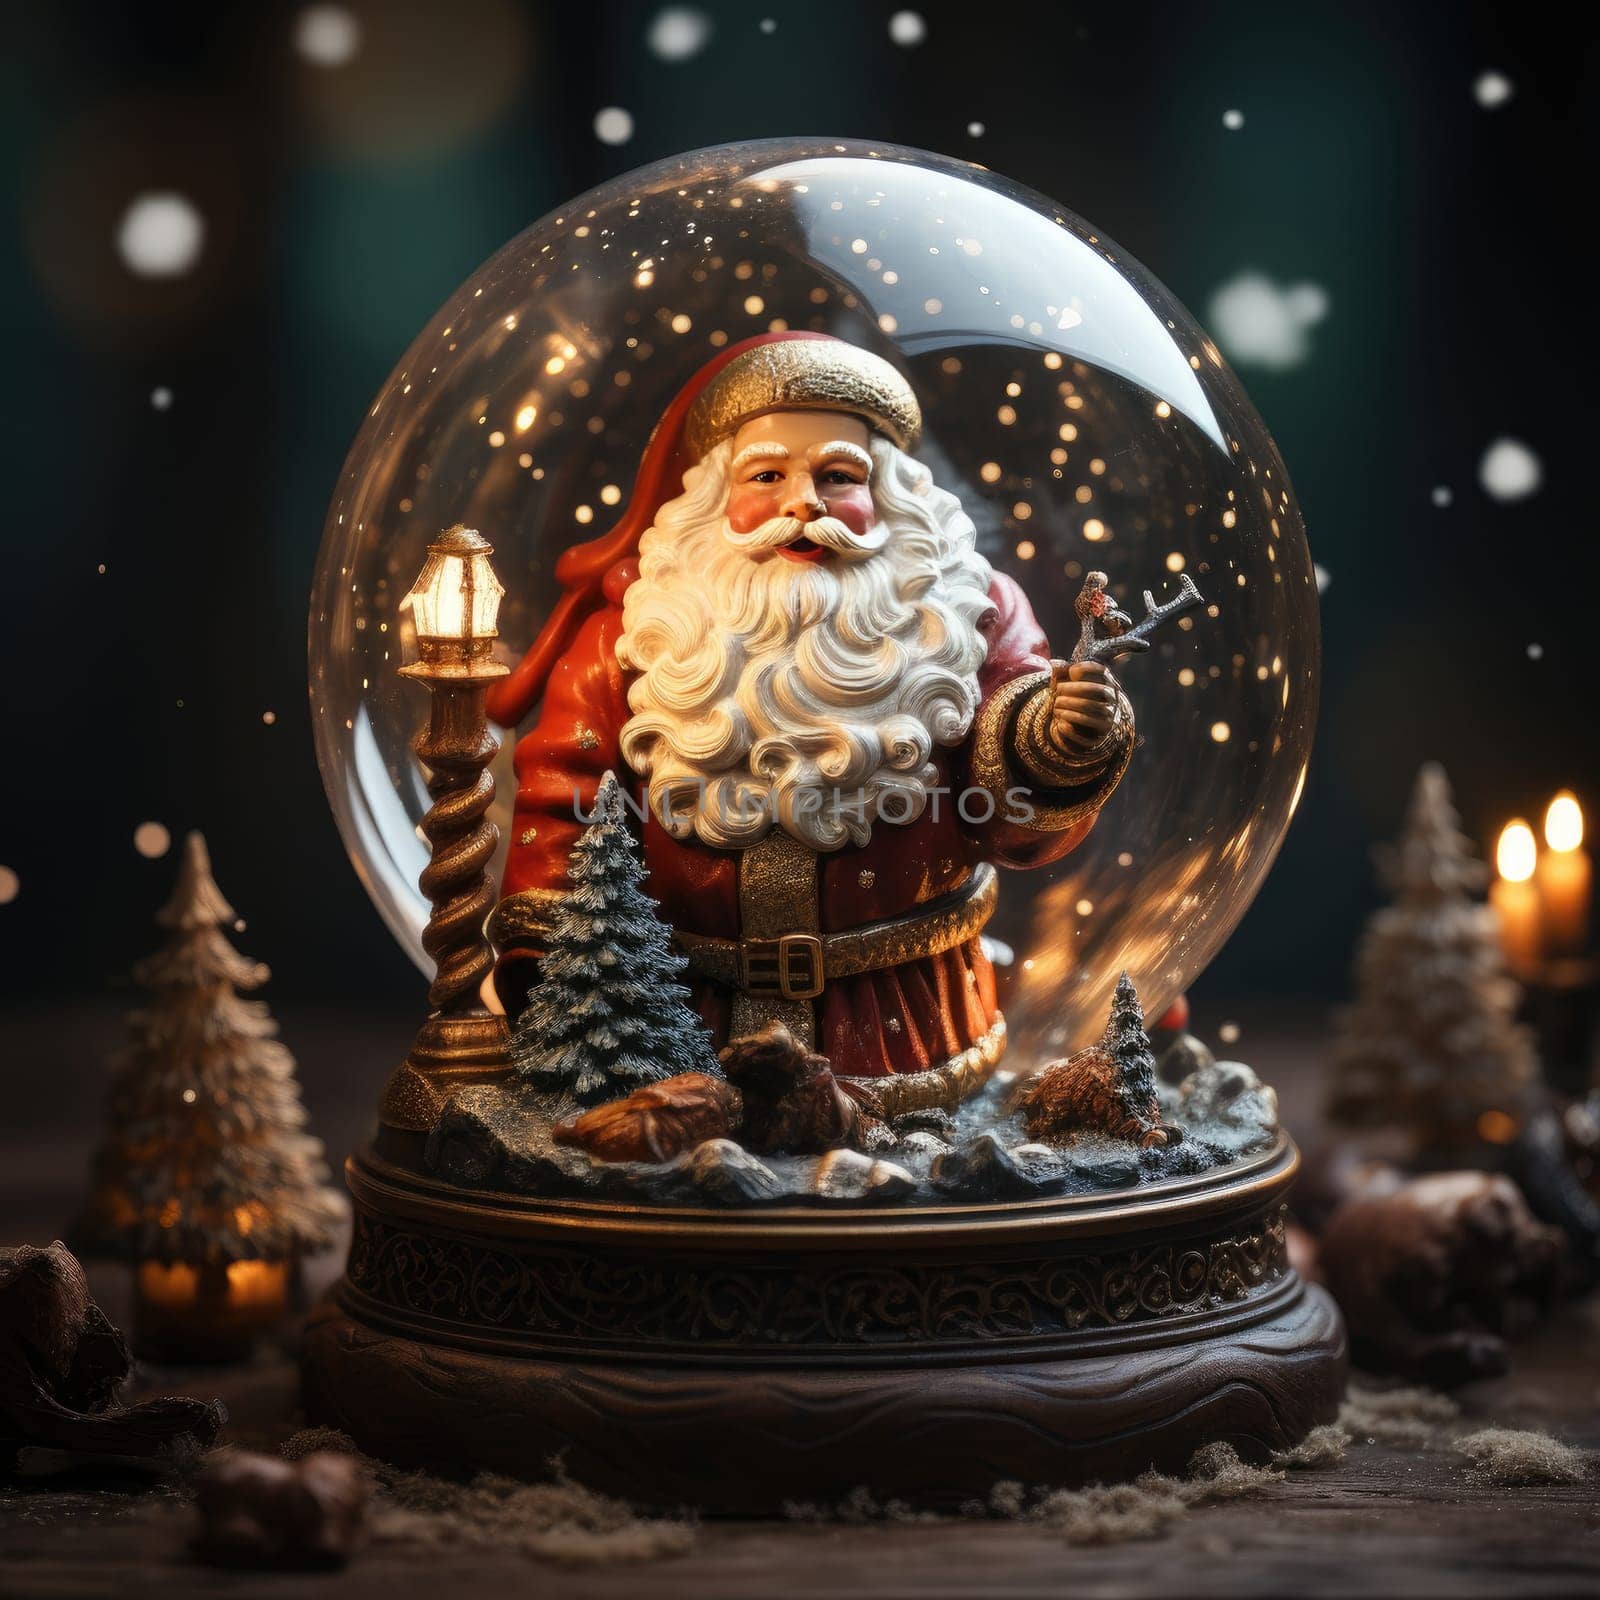 A festive glass ball with Santa Claus is the perfect Christmas gift idea by Yurich32